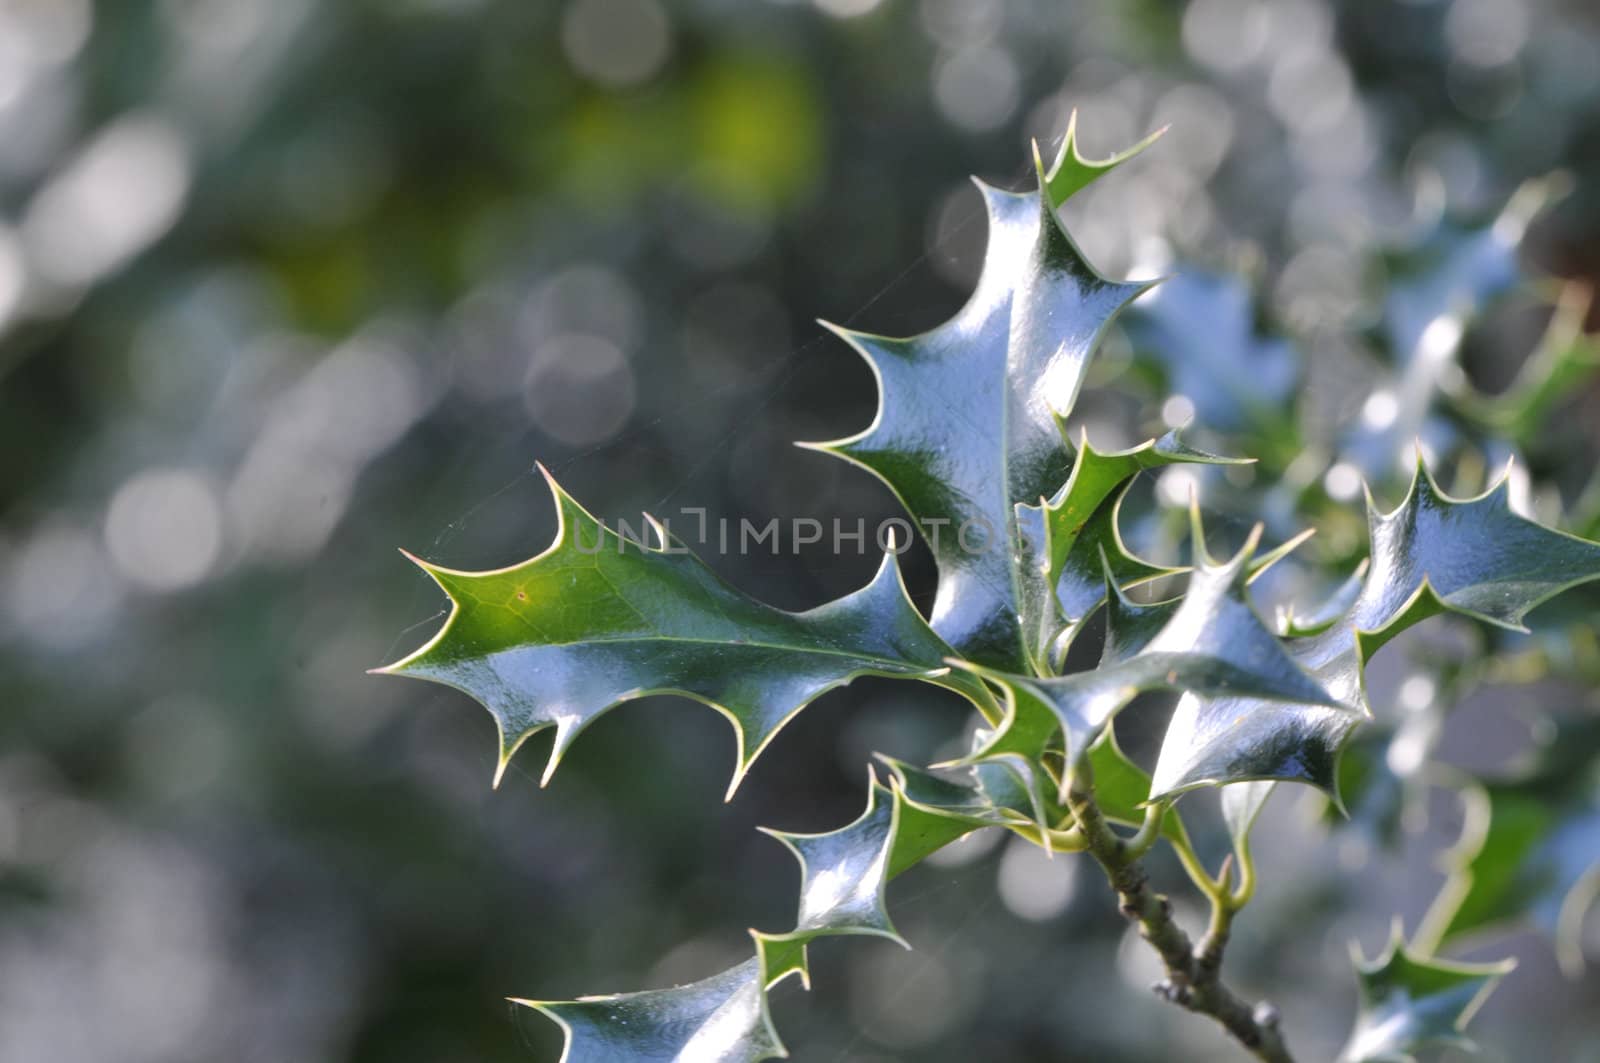 Green Holly pointed Leafs with a blurred background